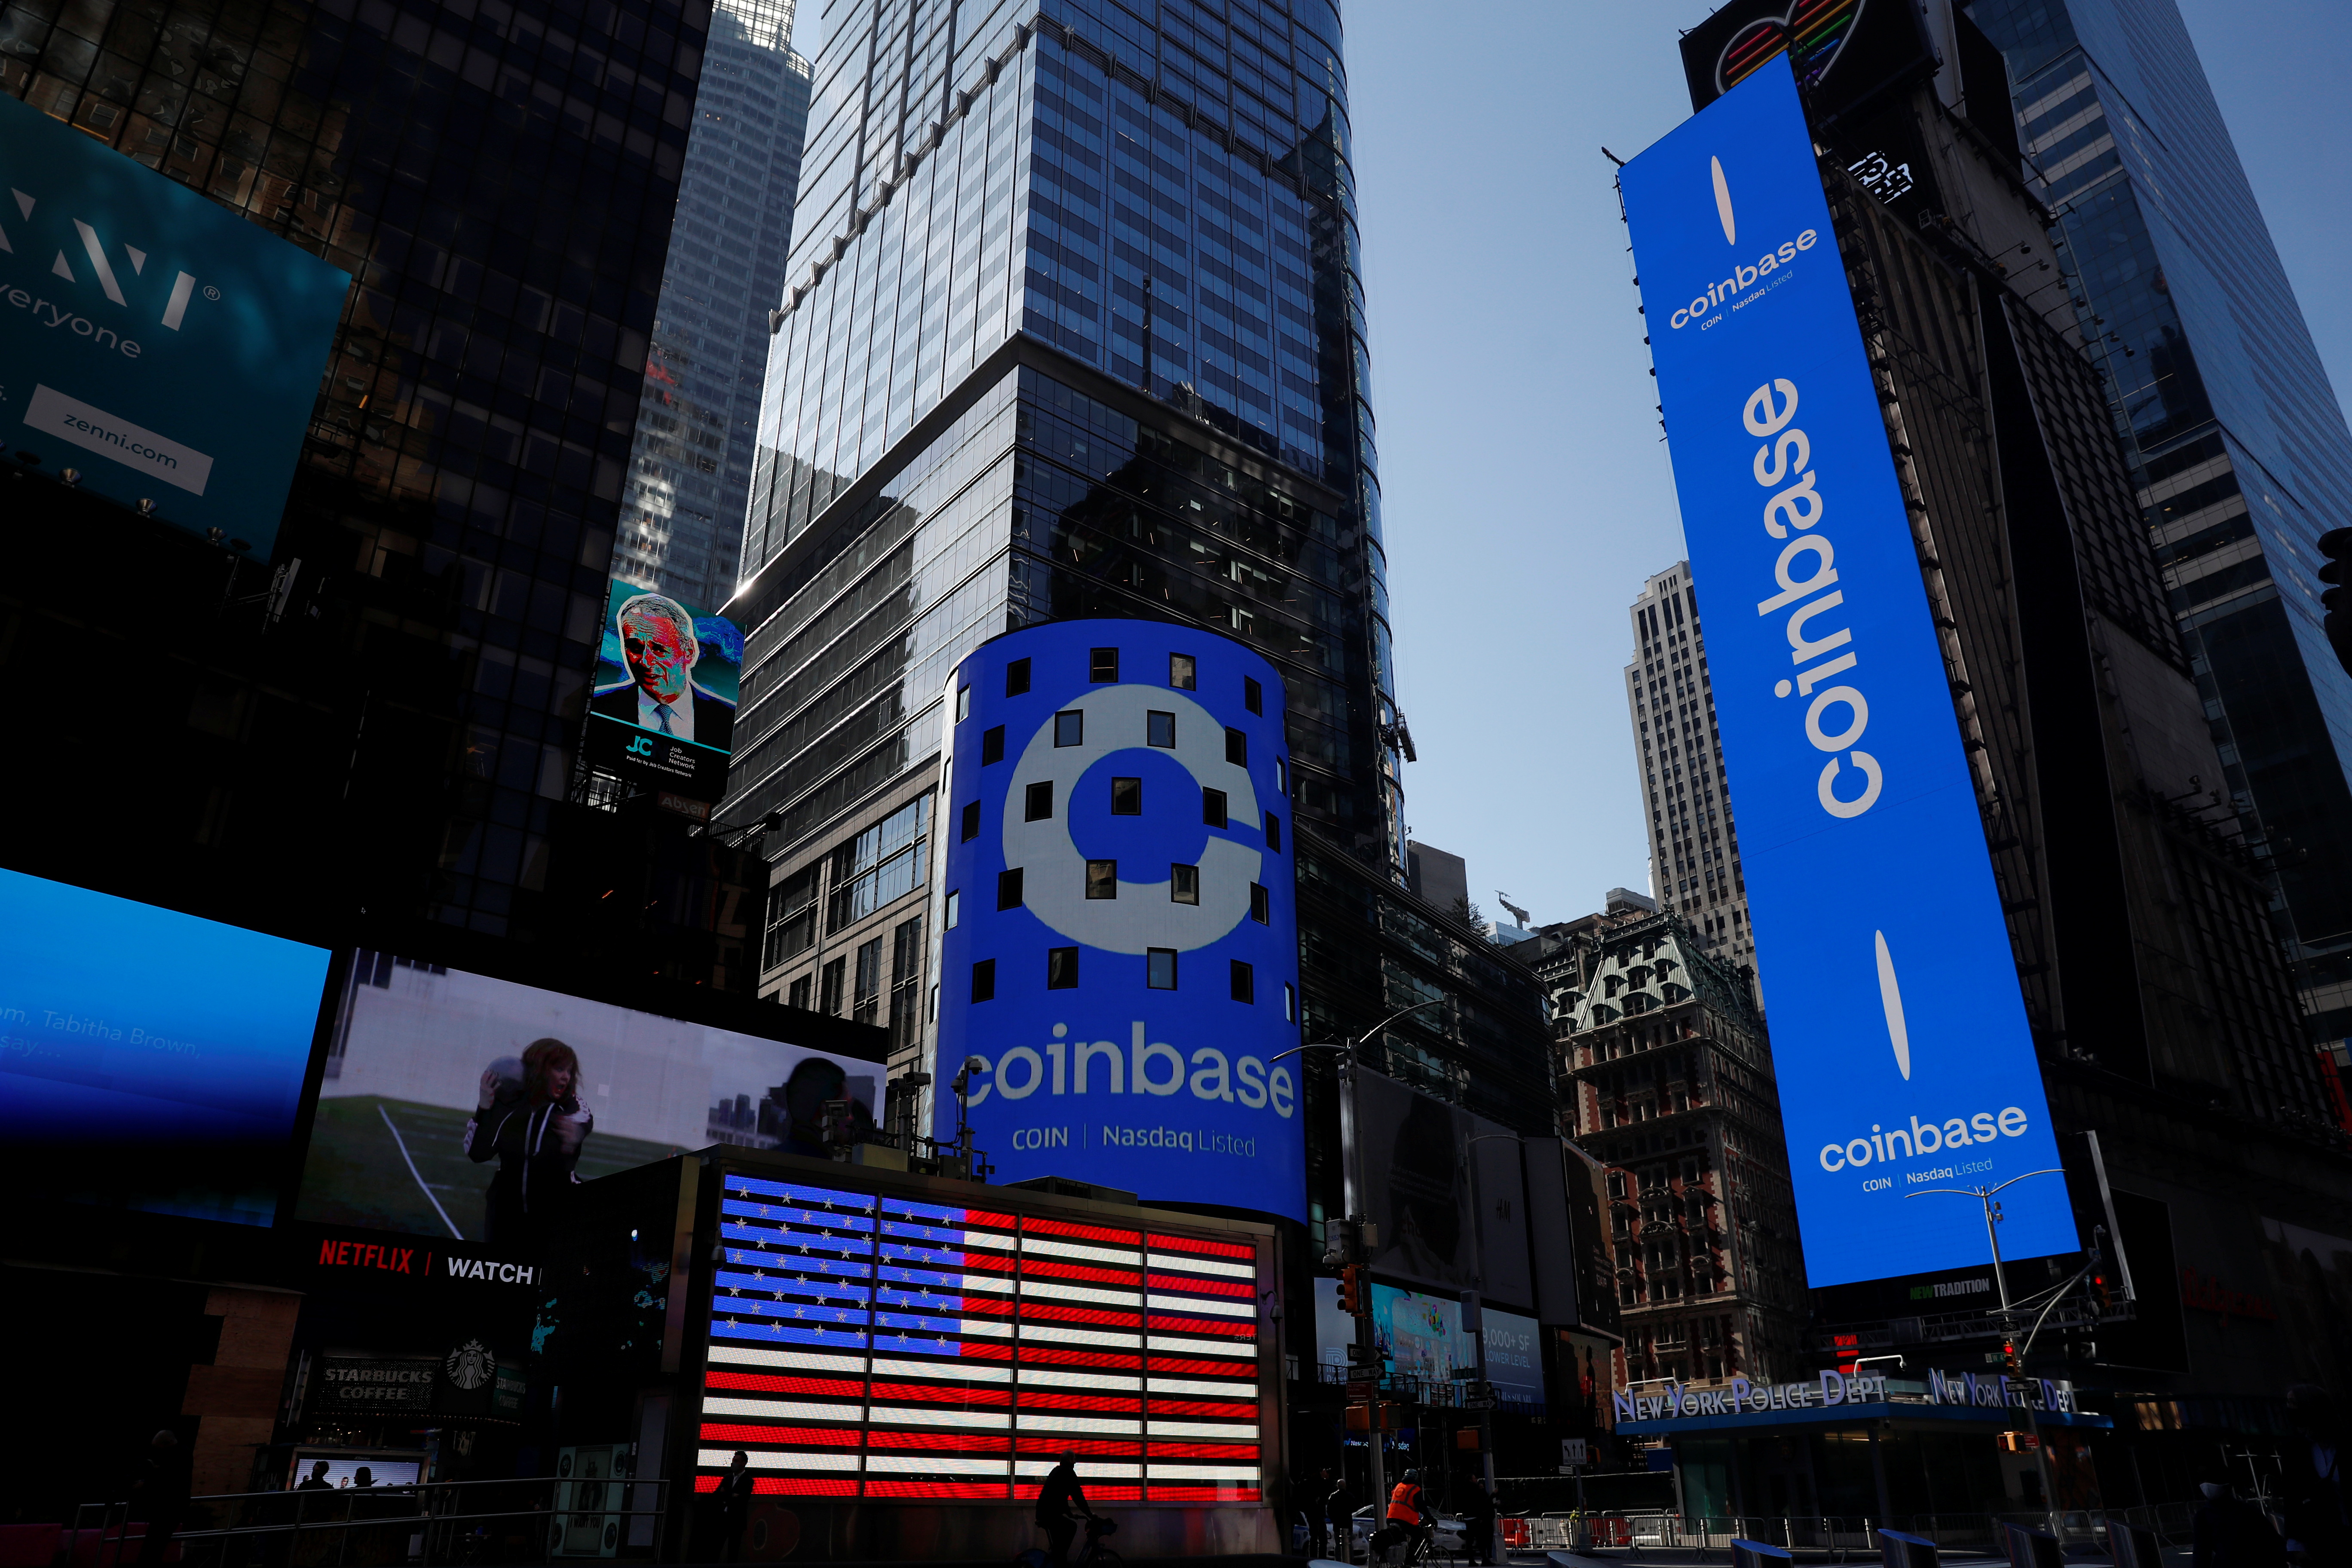 The logo for Coinbase Global Inc is displayed on the Nasdaq MarketSite jumbotron and others at Times Square in New York